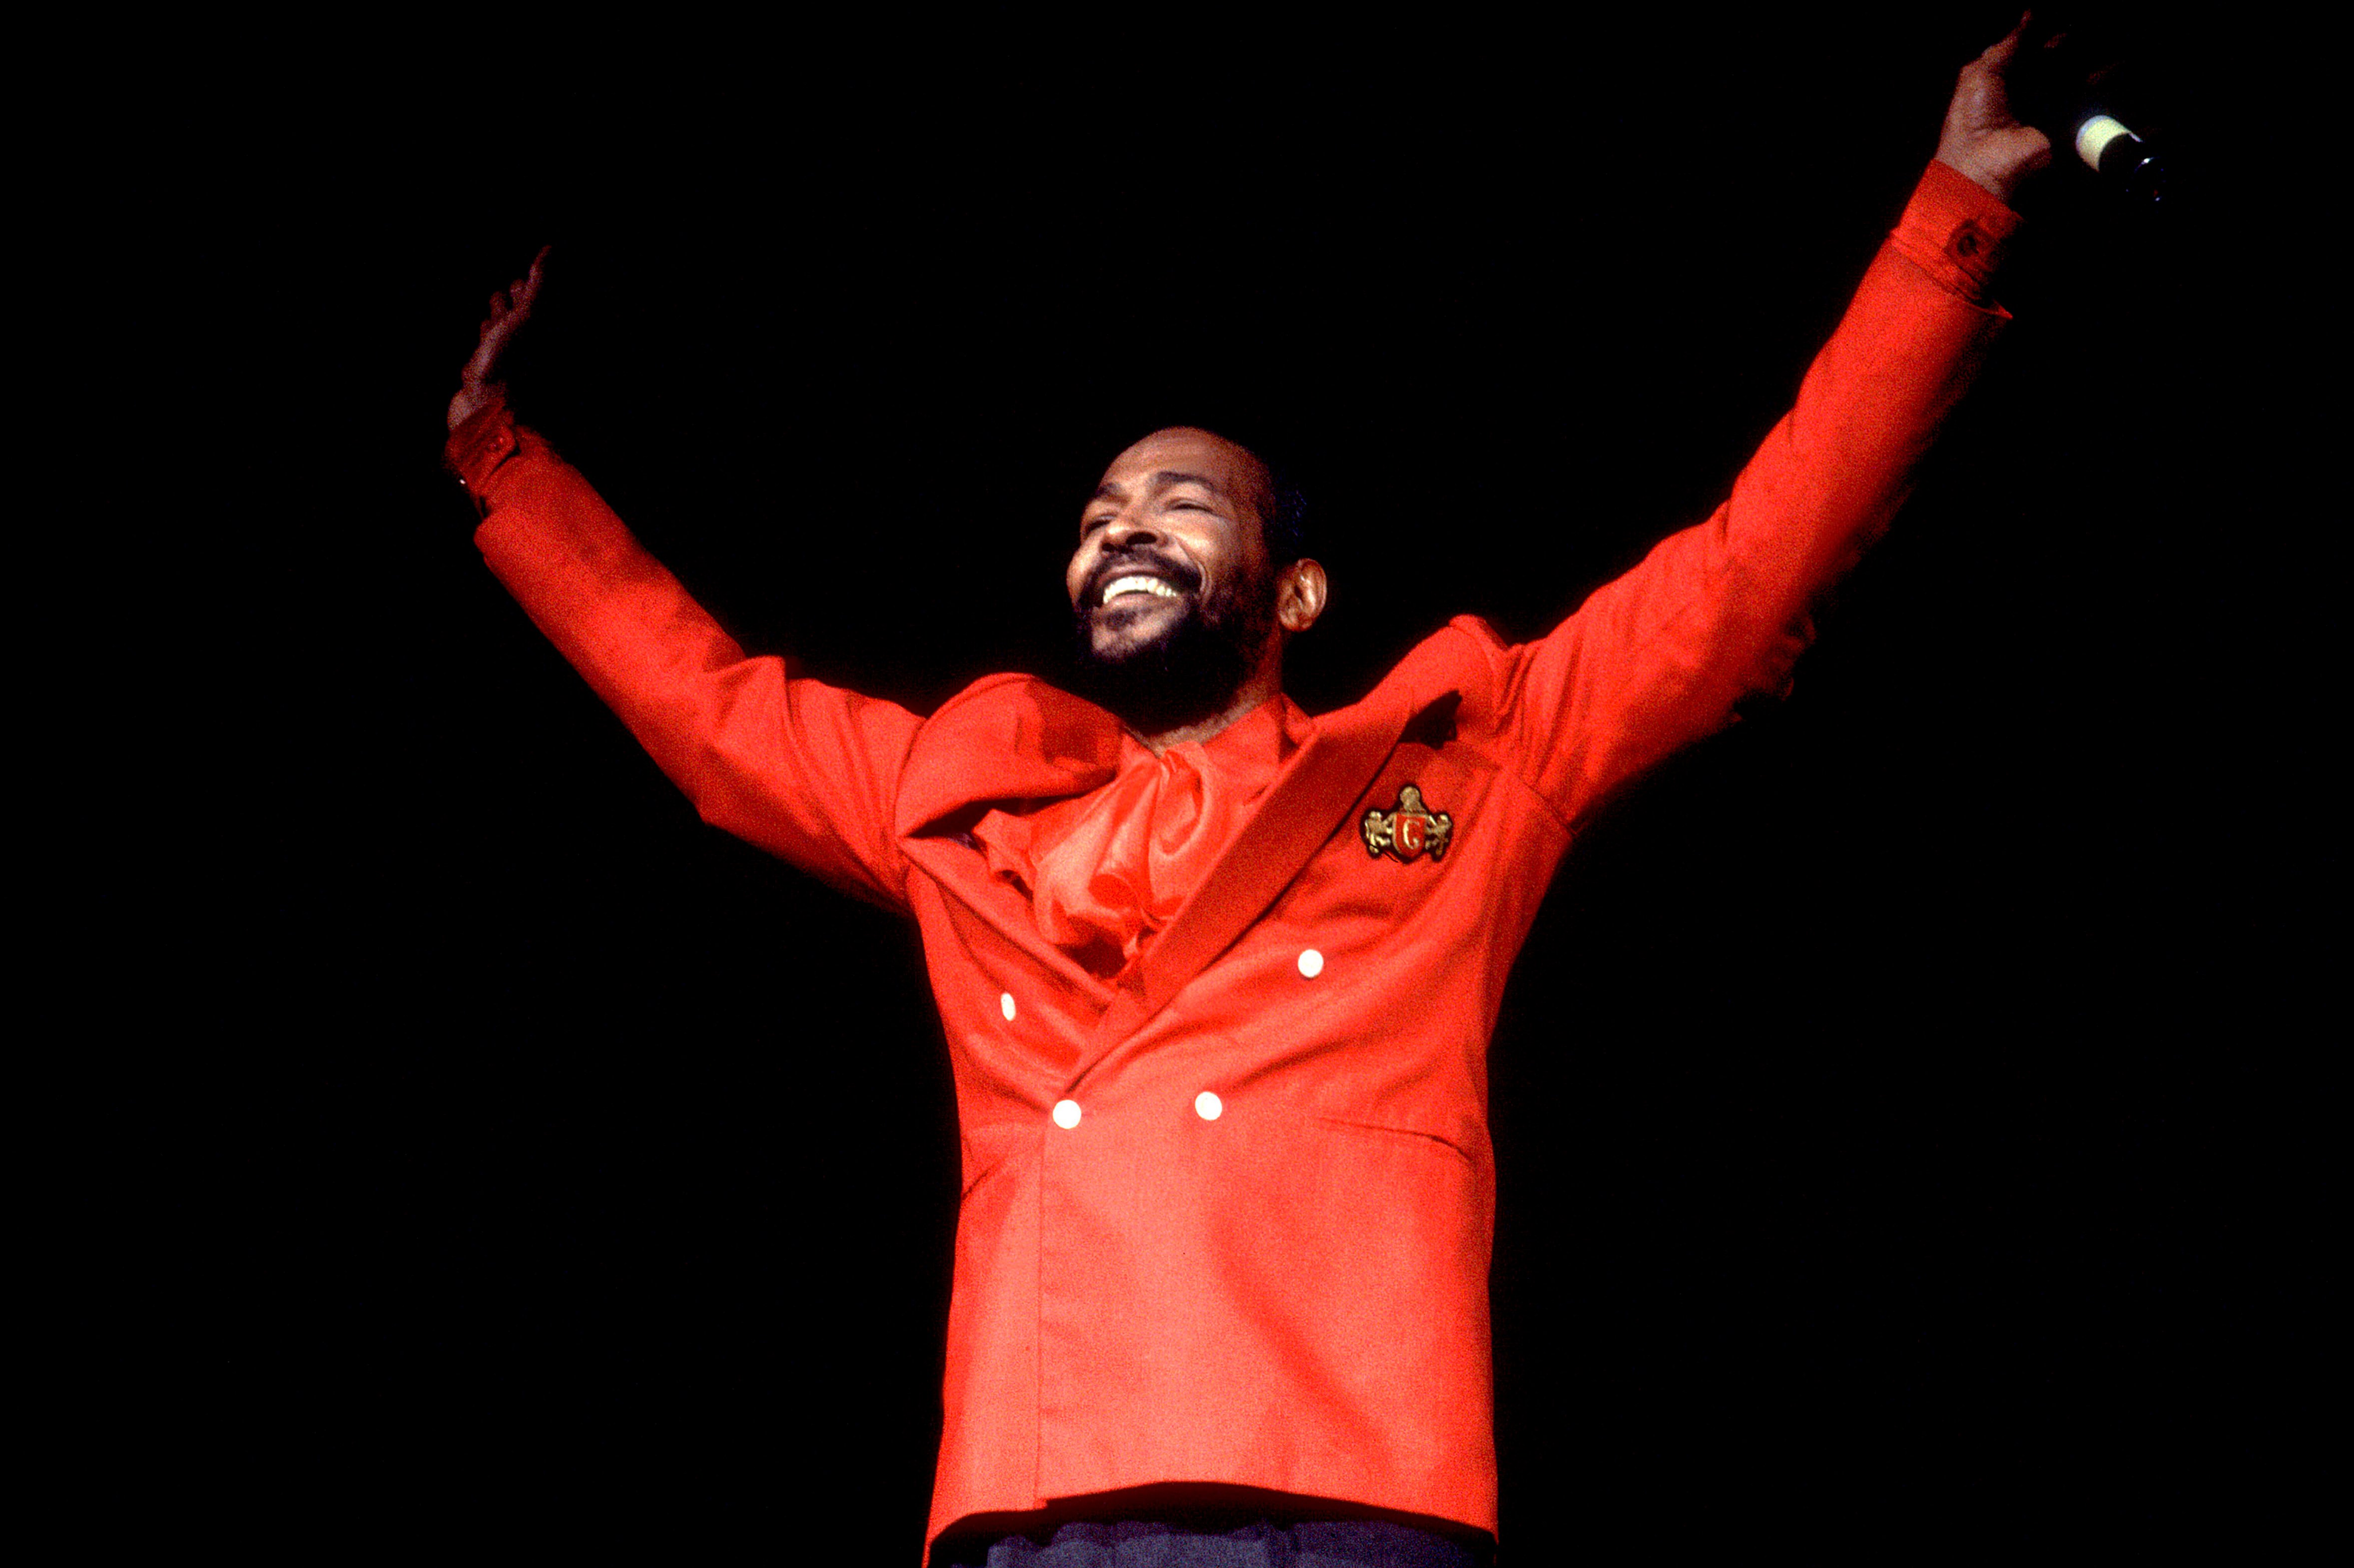 Marvin Gaye raising his hands onstage after a performance in 1983